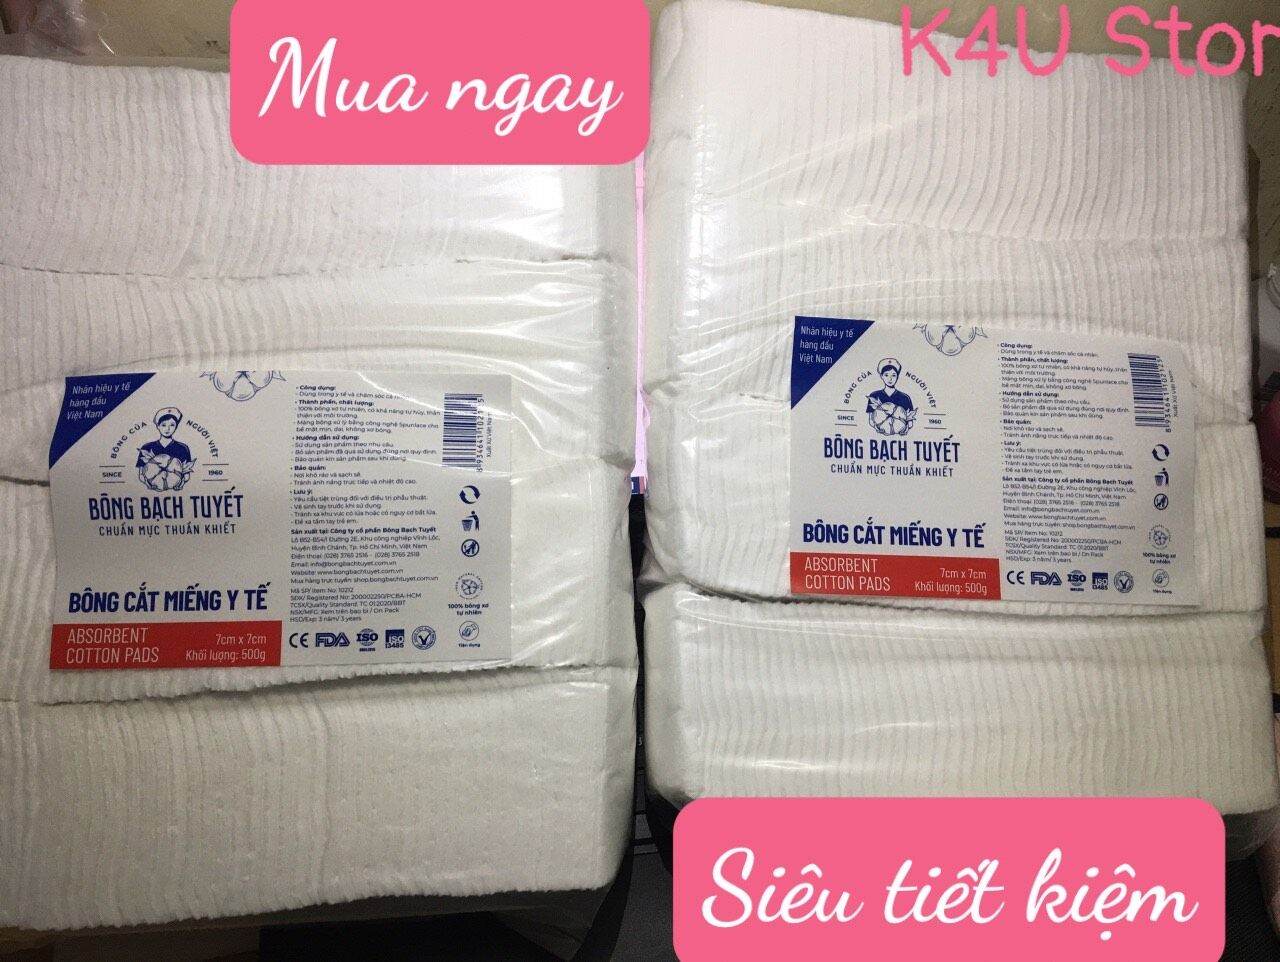 Bach Tuyet Absorbent Cotton Pads